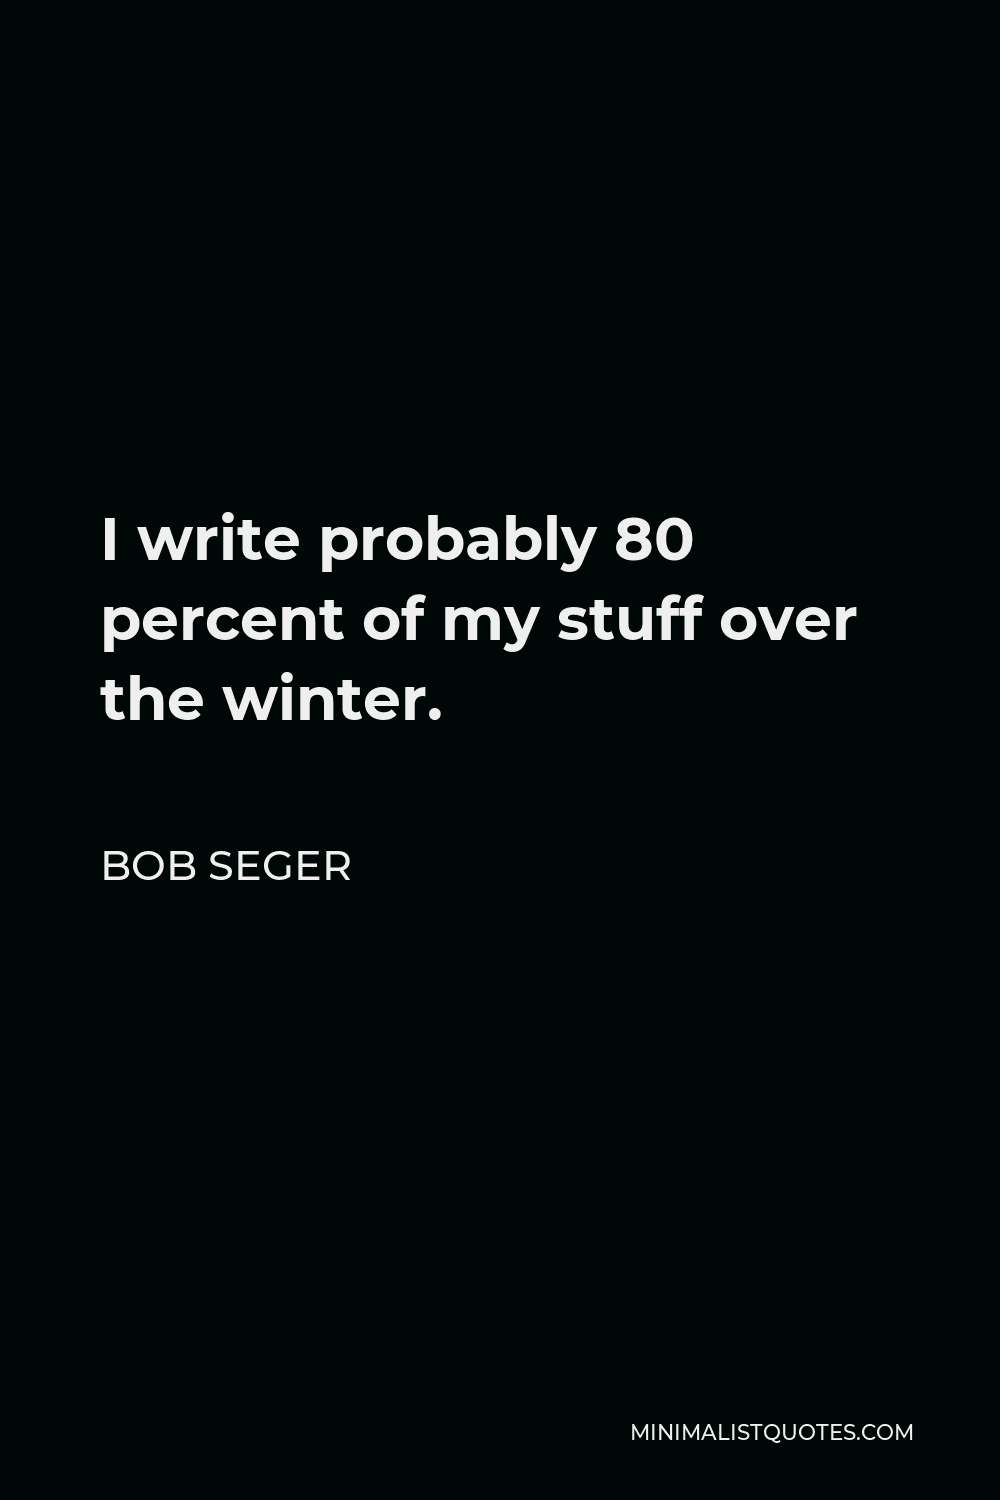 Bob Seger Quote - I write probably 80 percent of my stuff over the winter.